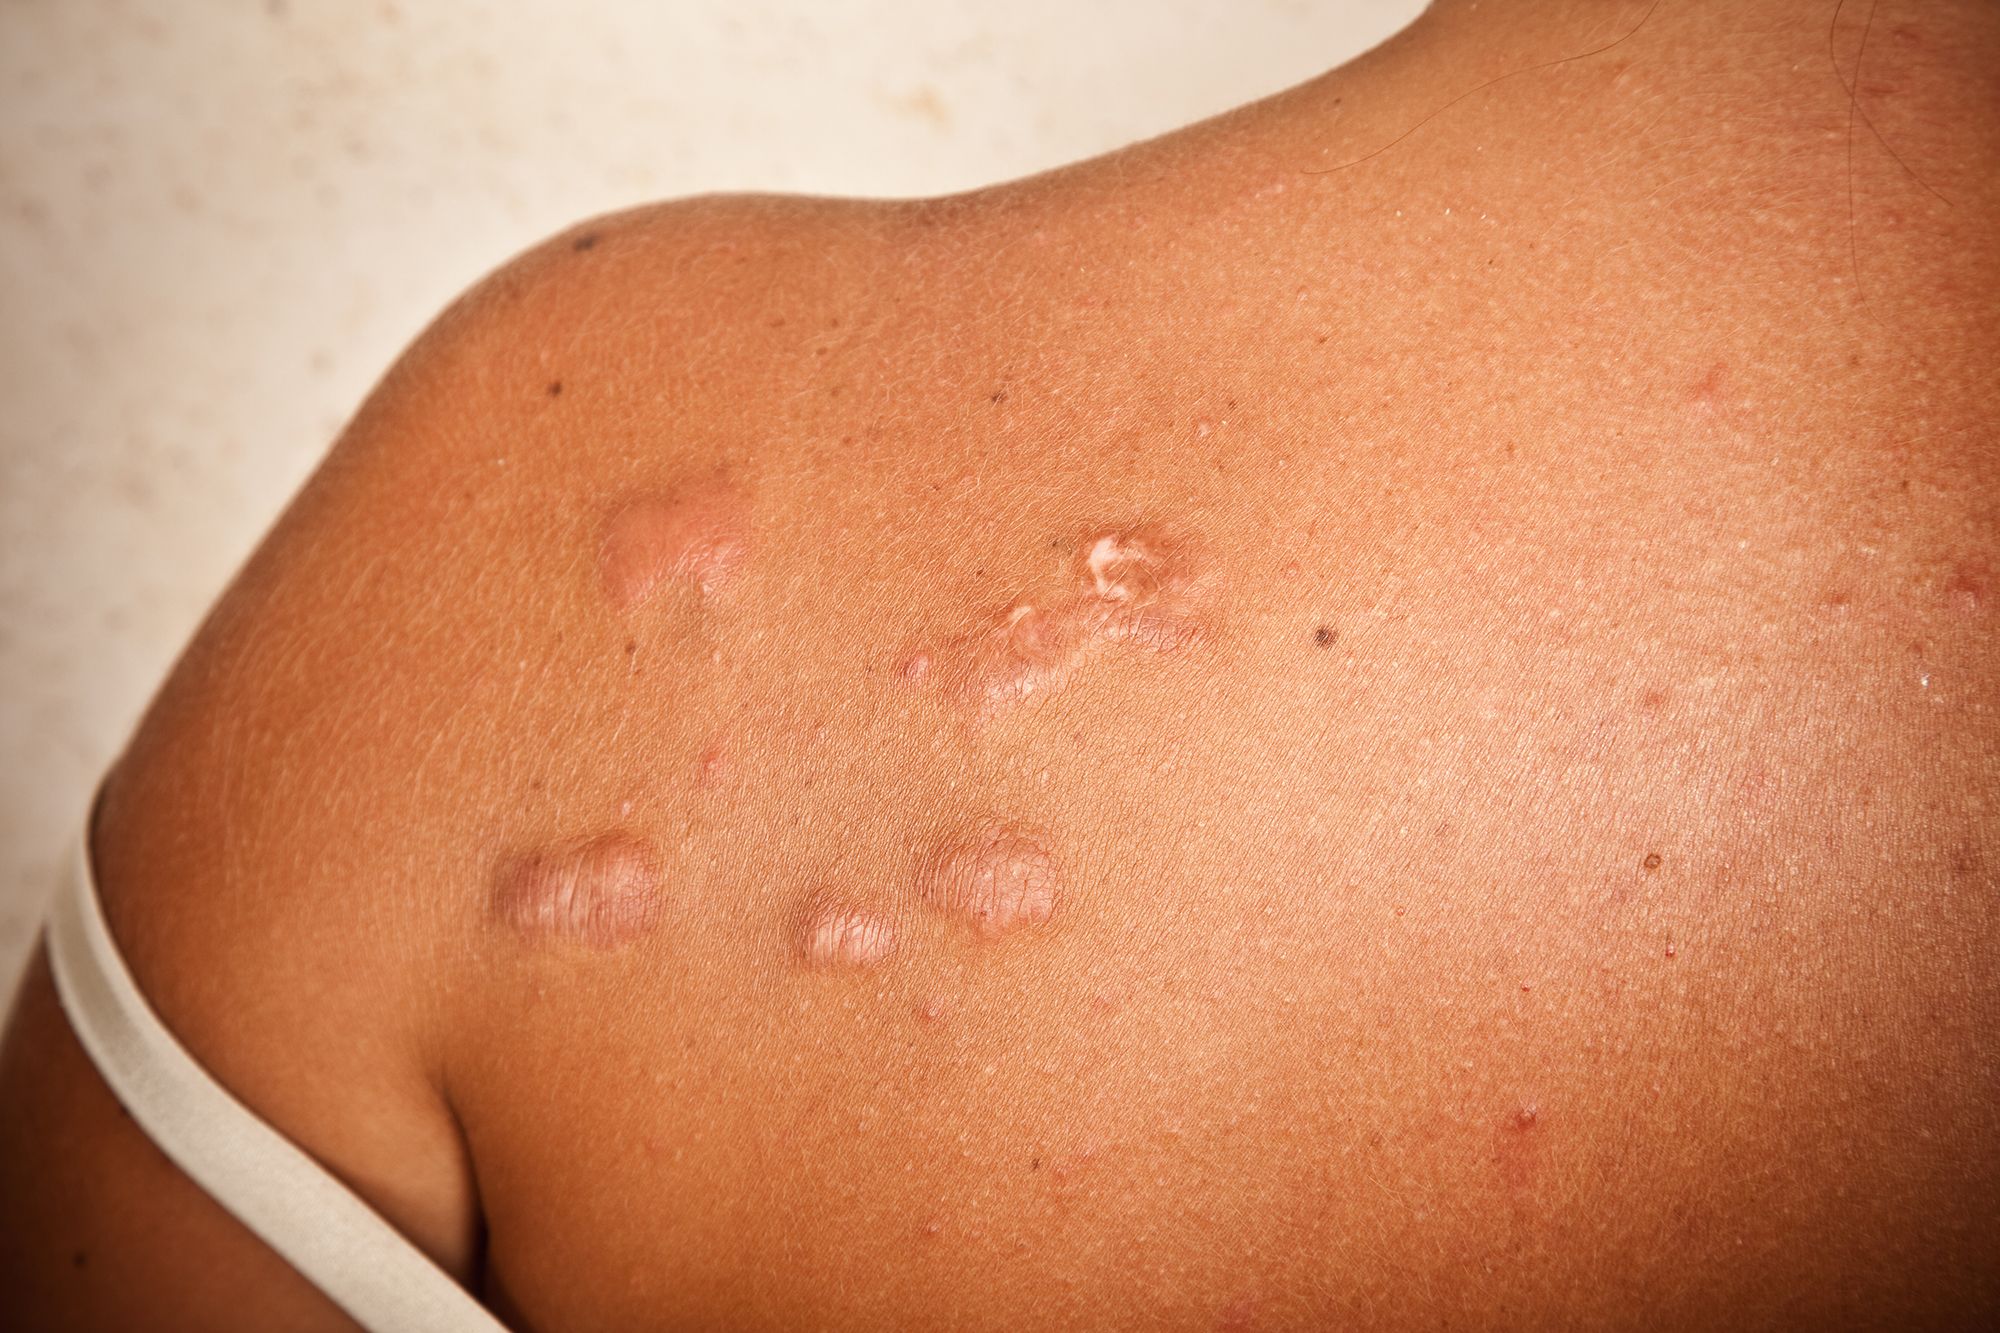 Keloids - What They Are, Causes + How To Get Rid Of Keloid Scars